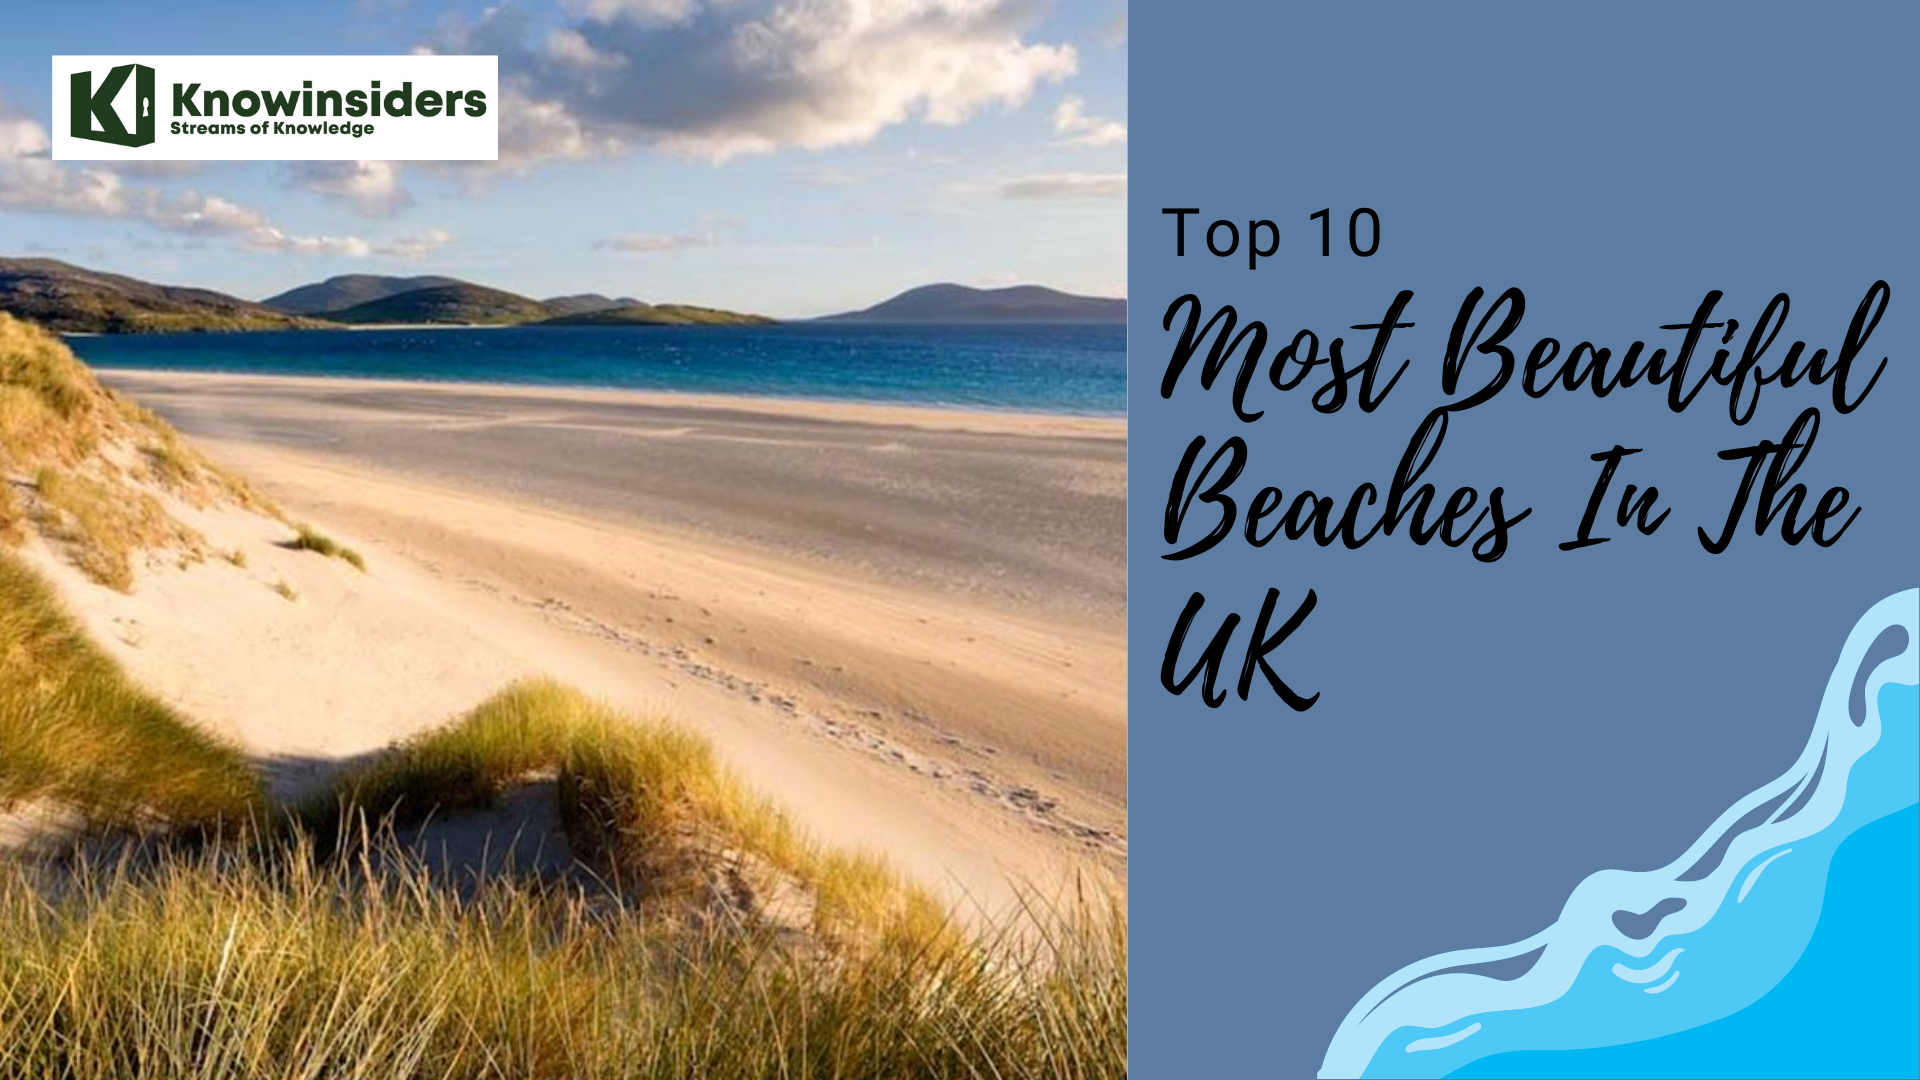 Top 10 Most Beautiful Beaches In The UK